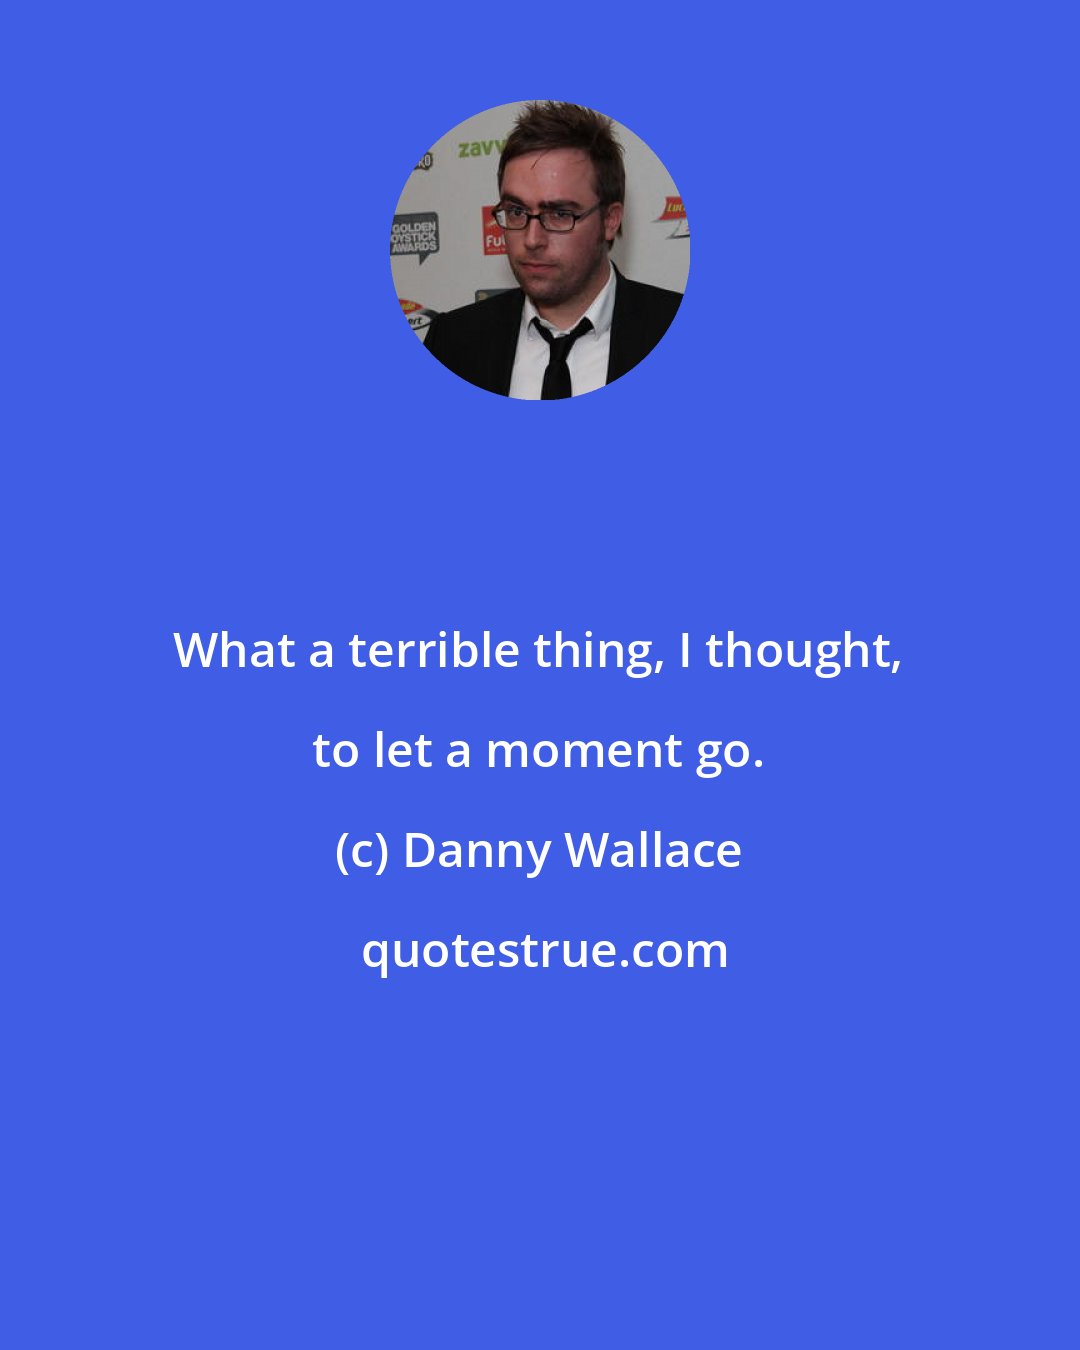 Danny Wallace: What a terrible thing, I thought, to let a moment go.